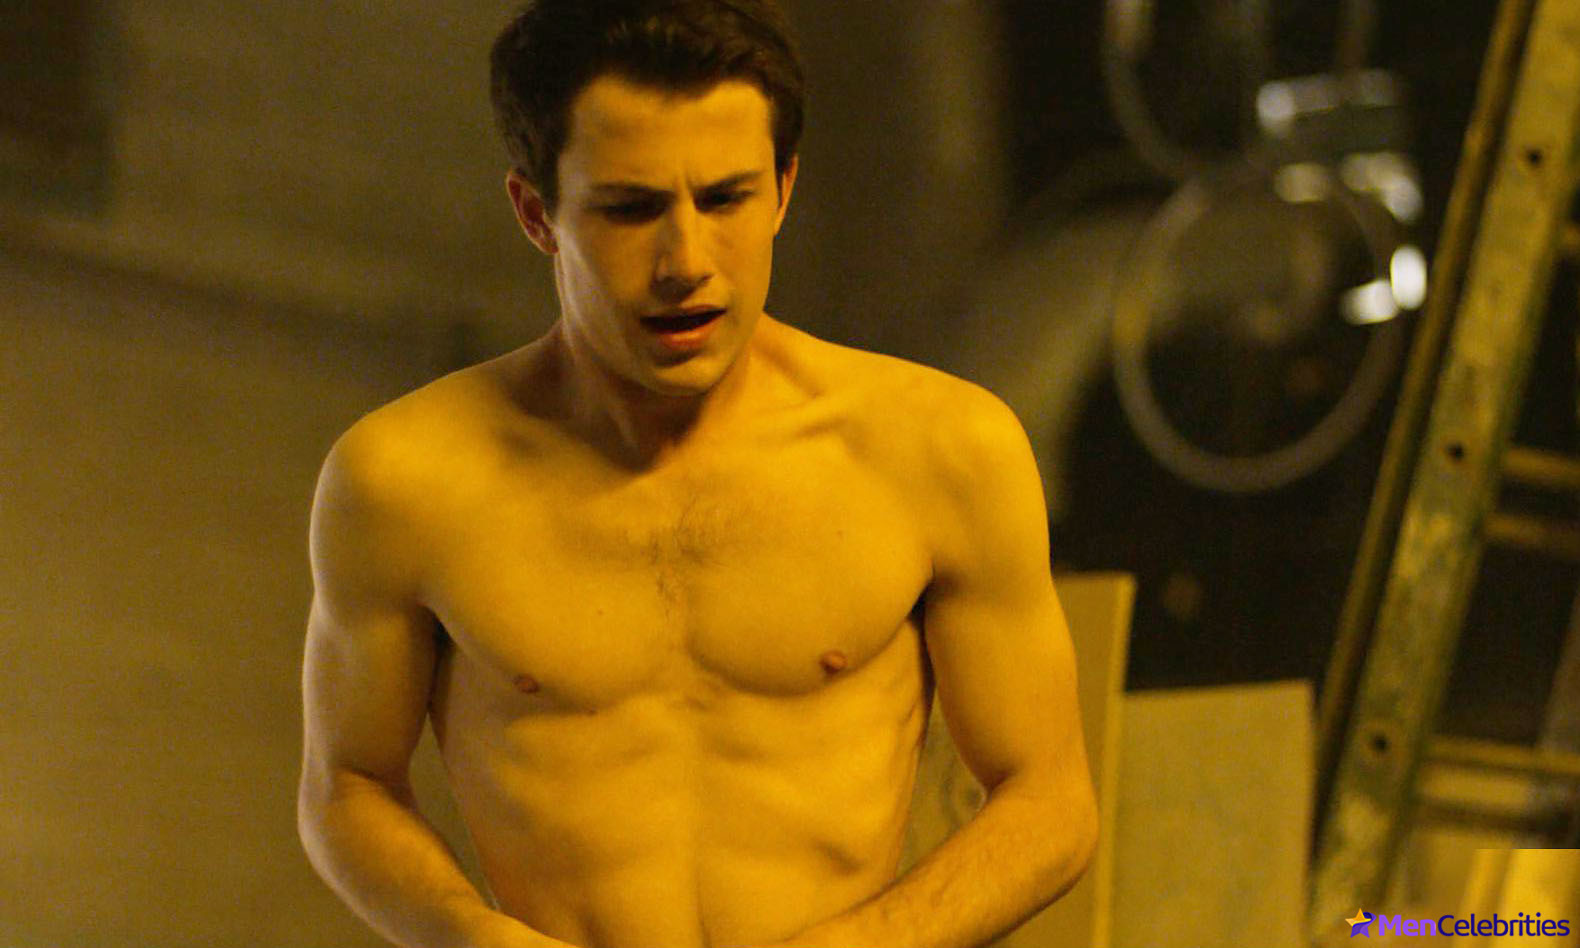 Dylan Minnette shirtless and sex scenes.